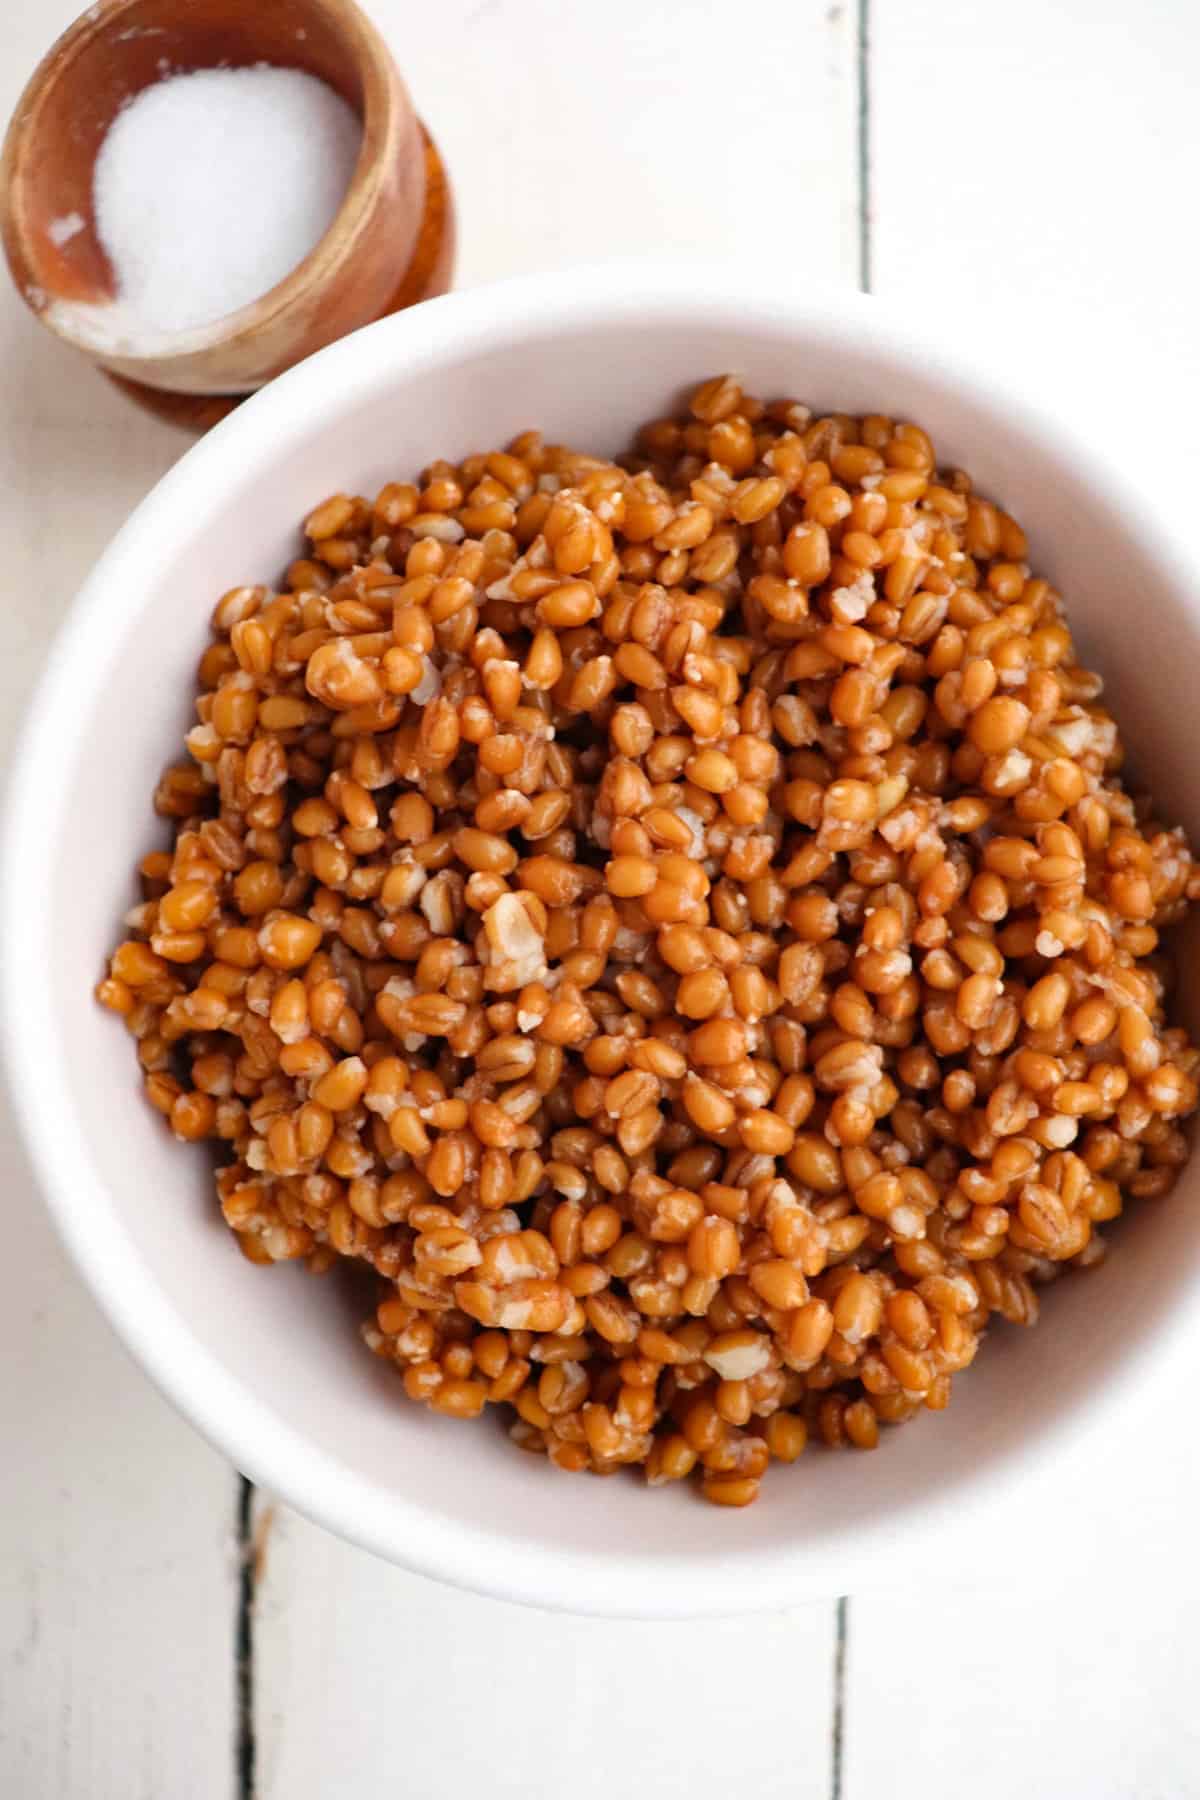 white bowl filled with cooked wheat berries.